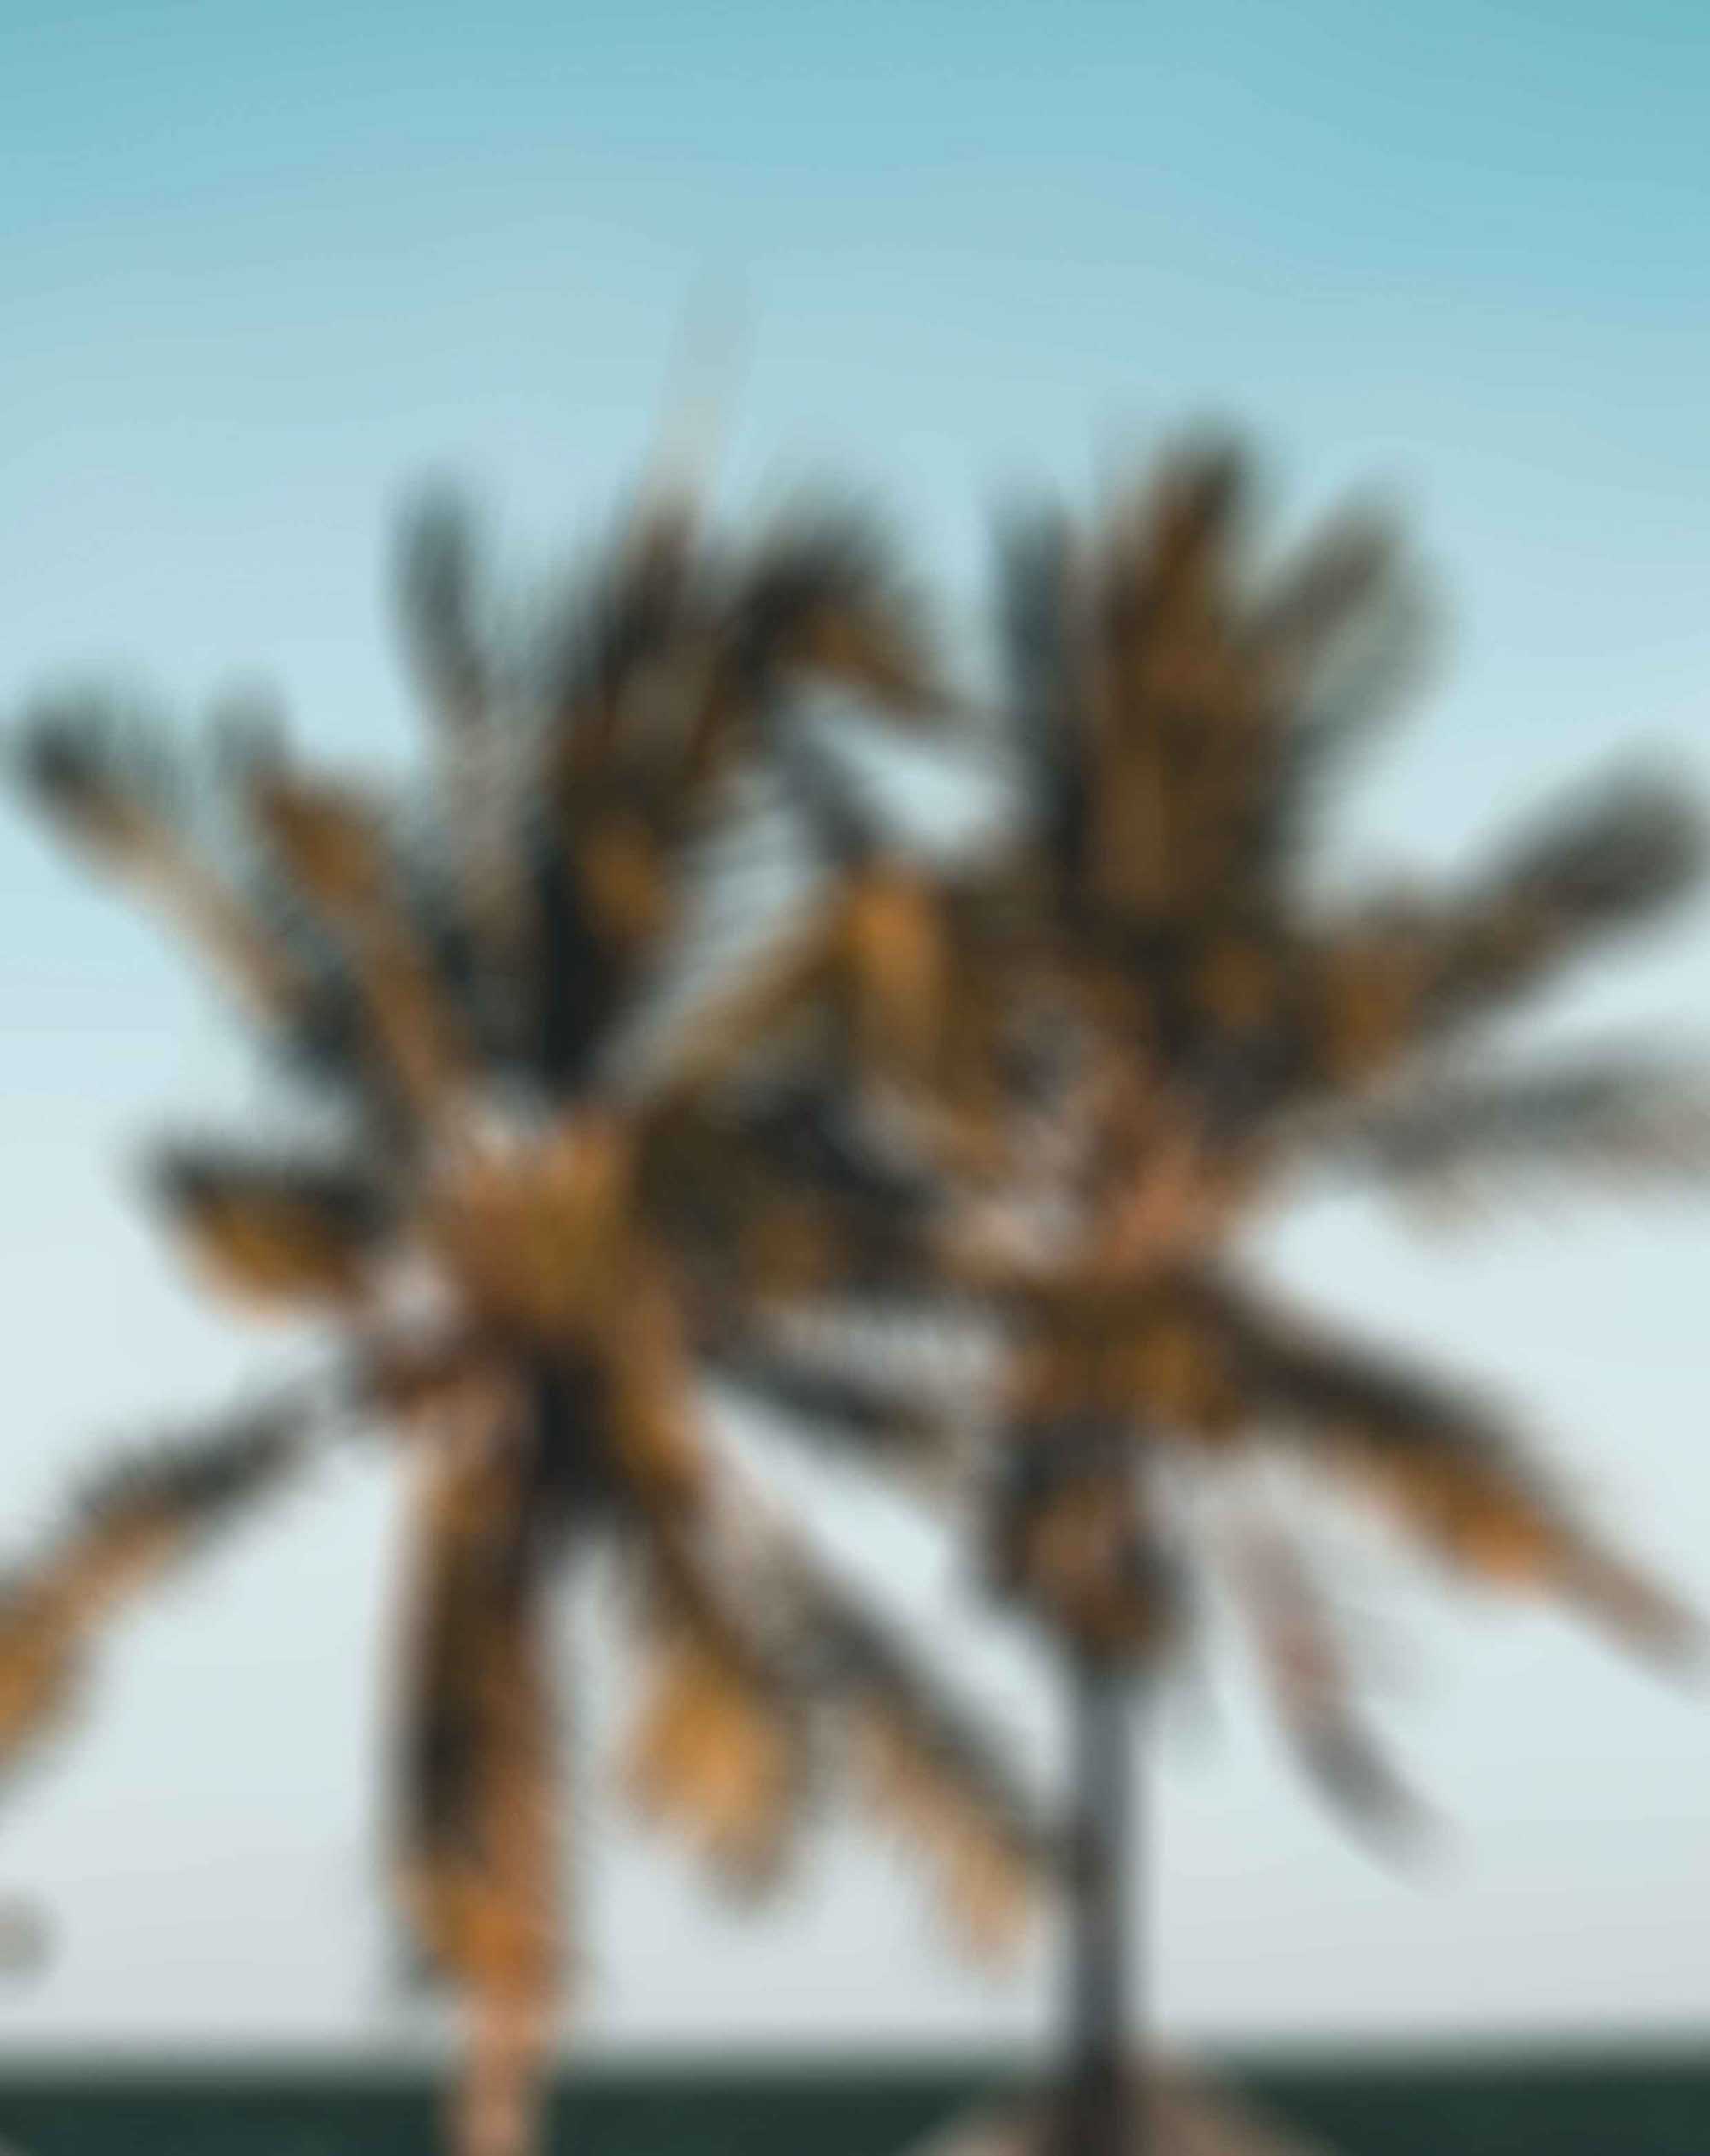 Coconut Tree Blur Background Free Stock Image Download /* ie hack */ }. mmp picture